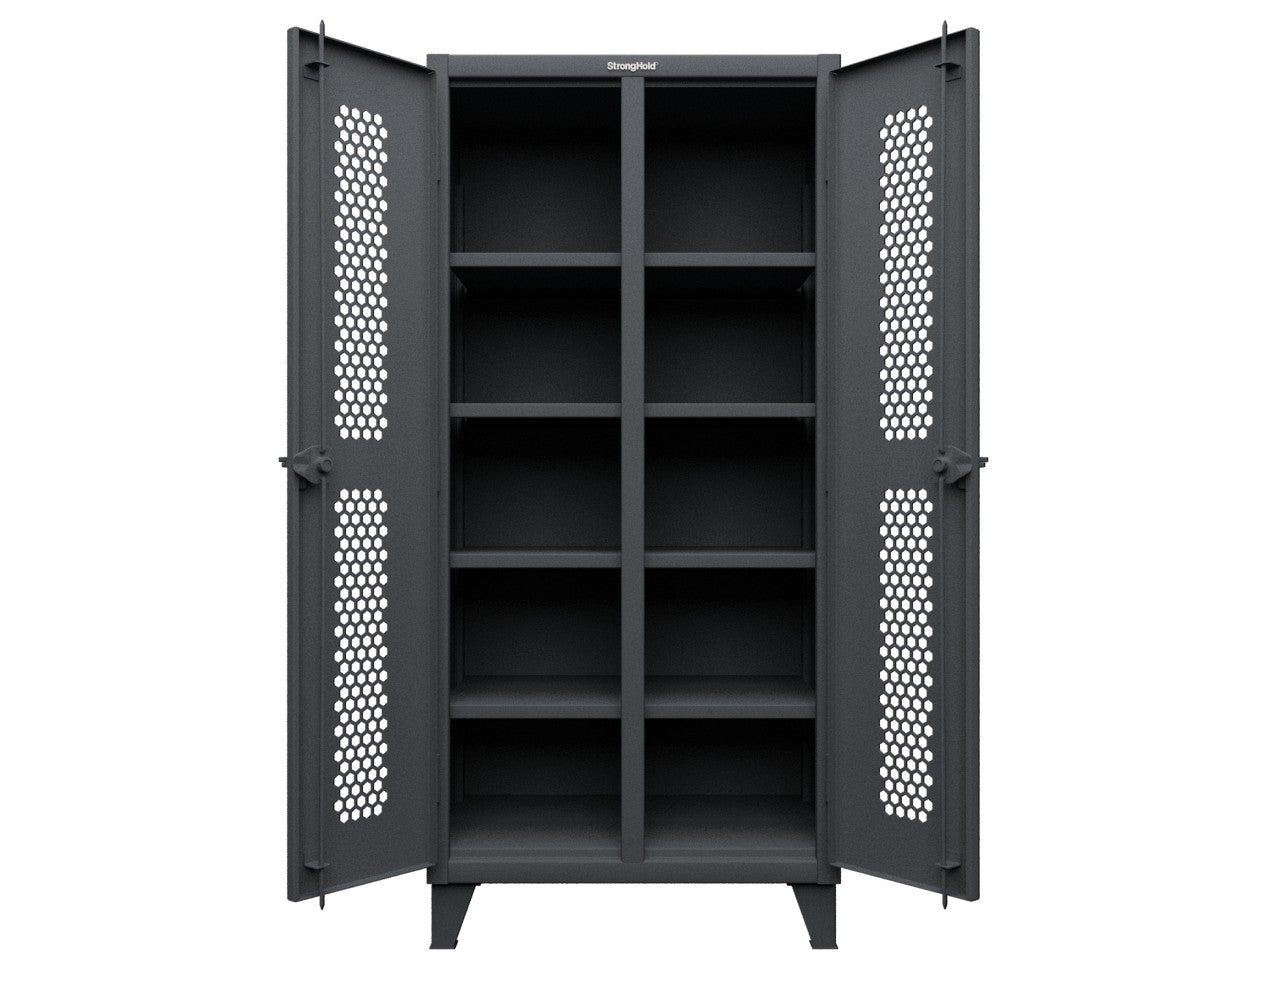 Extreme Duty 12 GA Ventilated (Hex) Double Shift Cabinet with 8 Shelves - 36 In. W x 24 In. D x 78 In. H